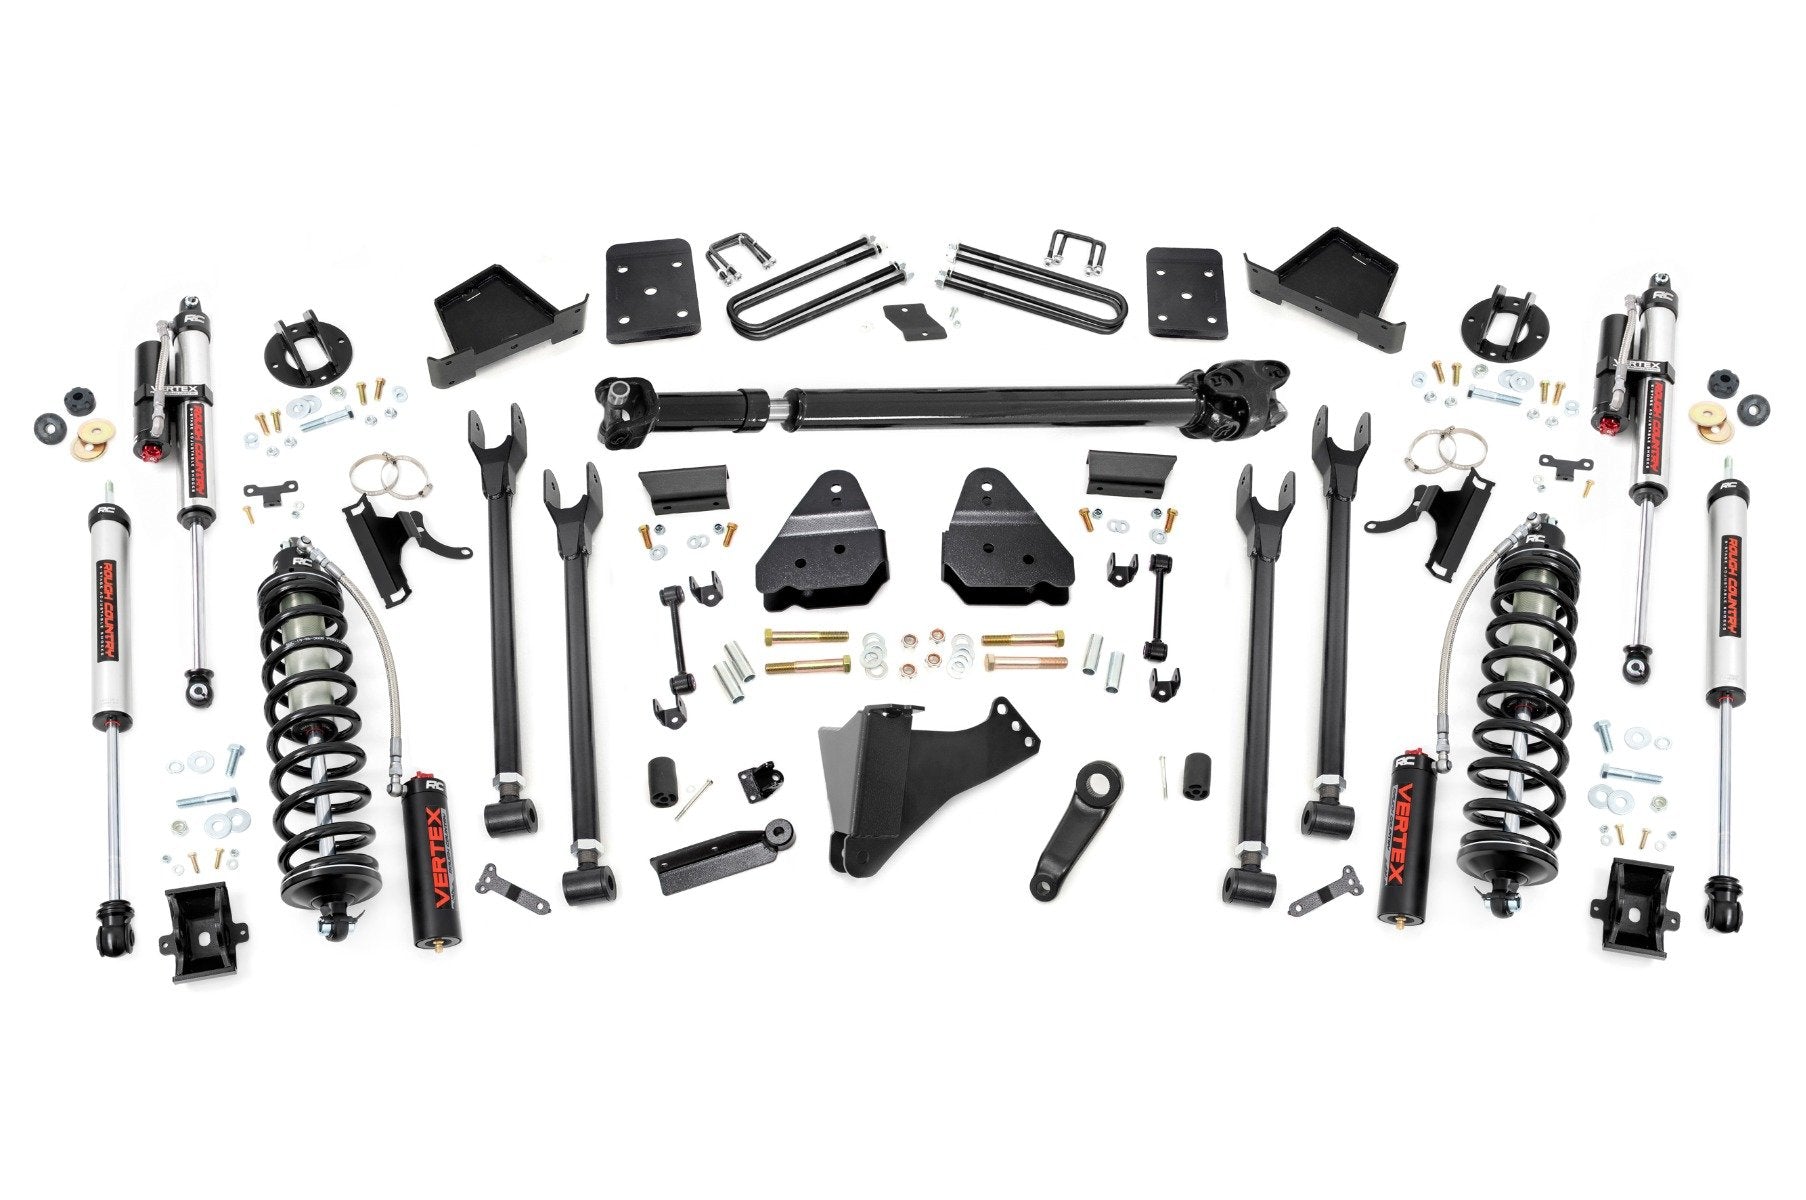 Rough Country 6 Inch Lift Kit  |  4-Link  |  No OVLD  |  D/S  |  C/O Vertex | Ford F-250/F-350 Super Duty (17-22)